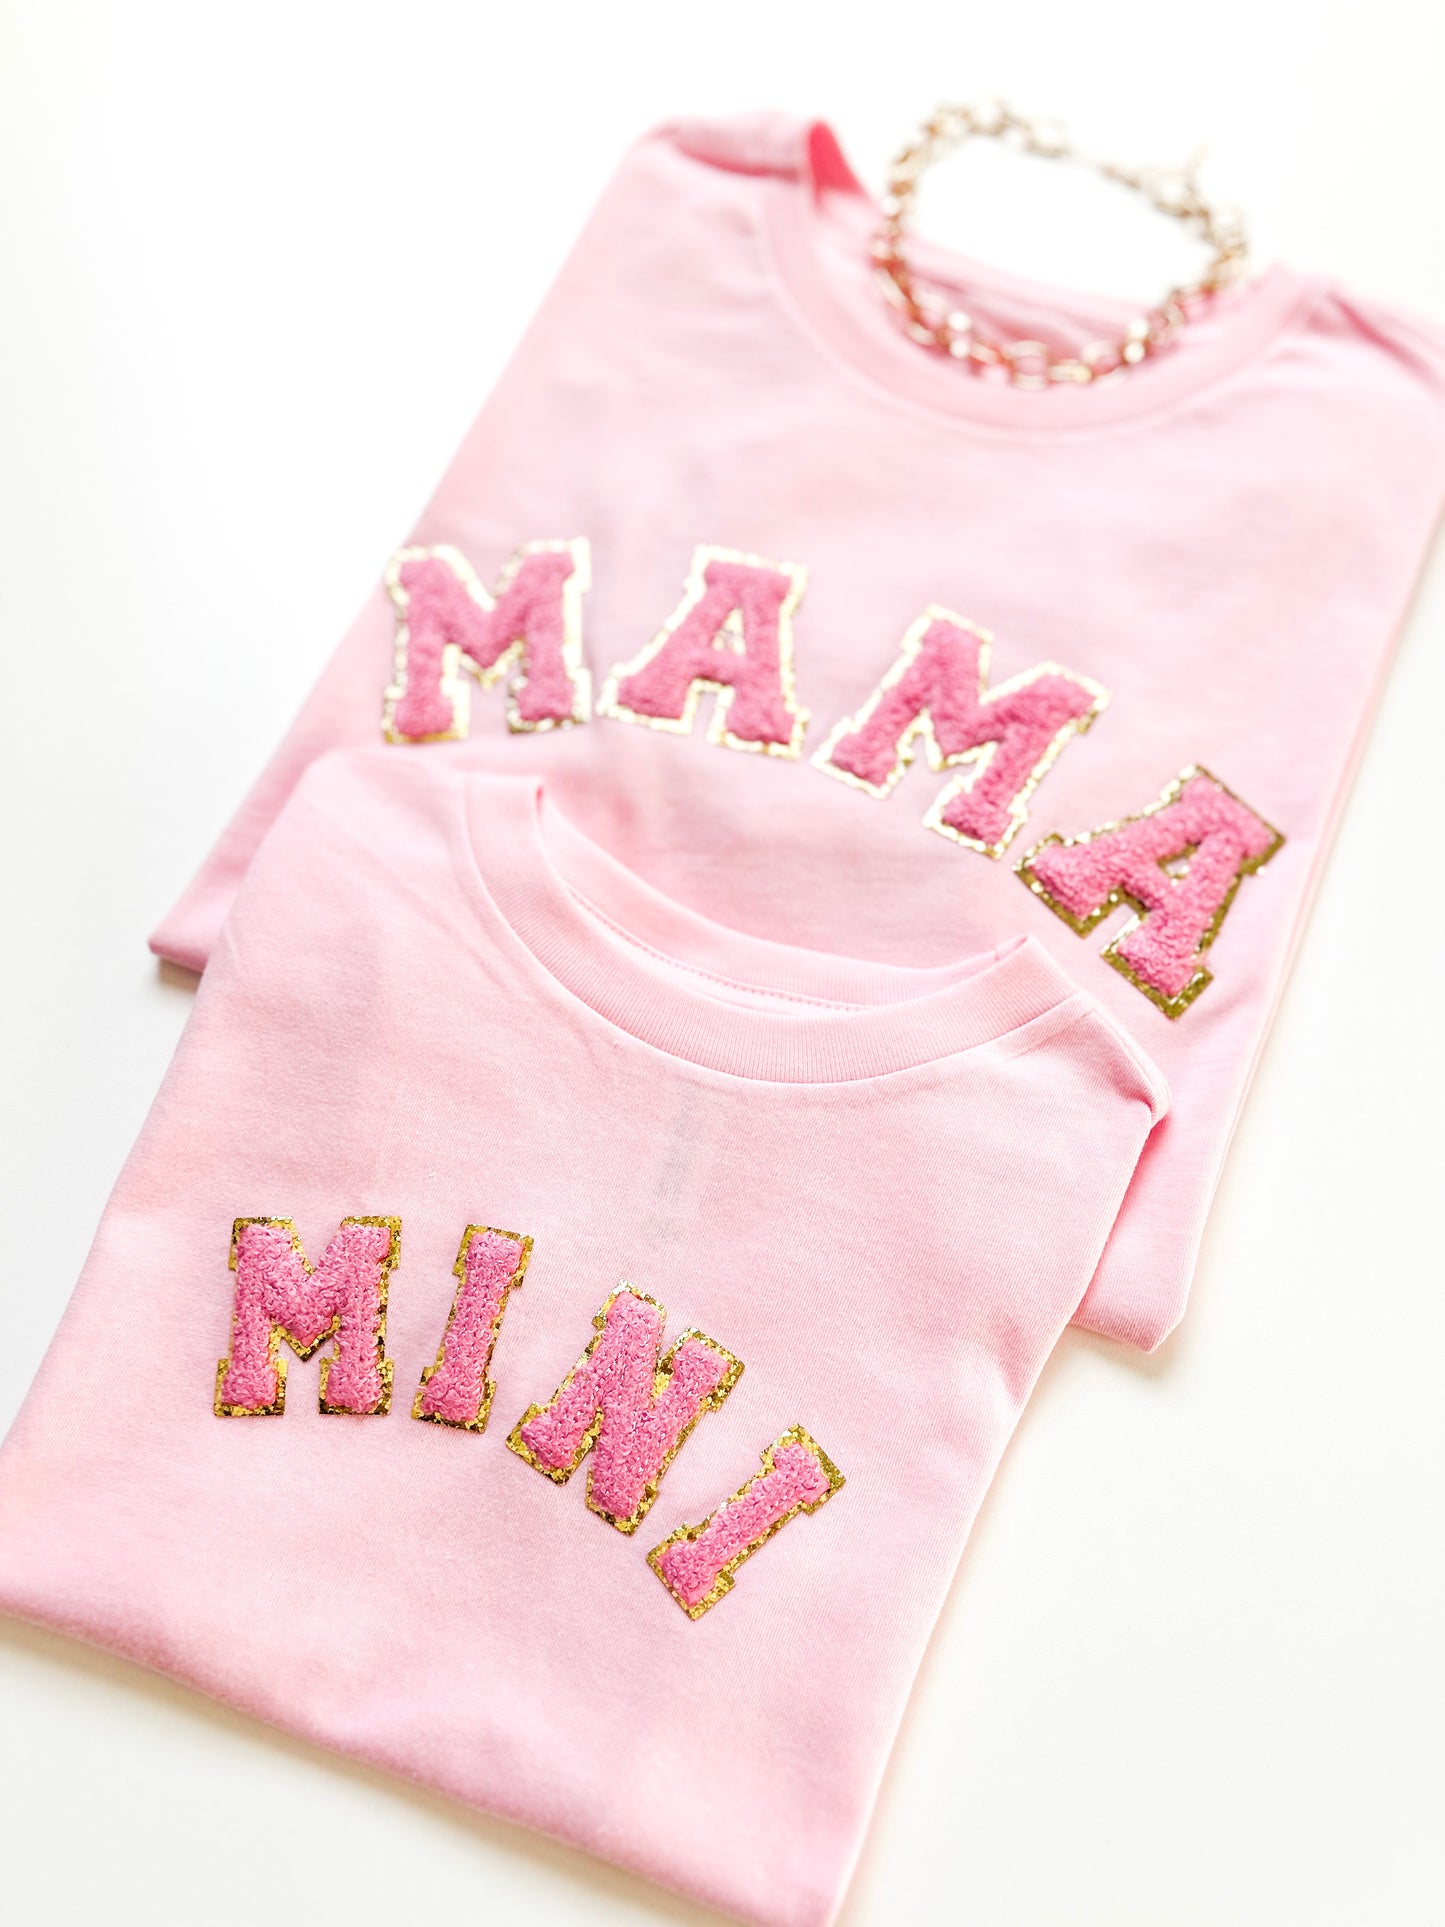 Mama and mini Matching Shirts with real chenille letters